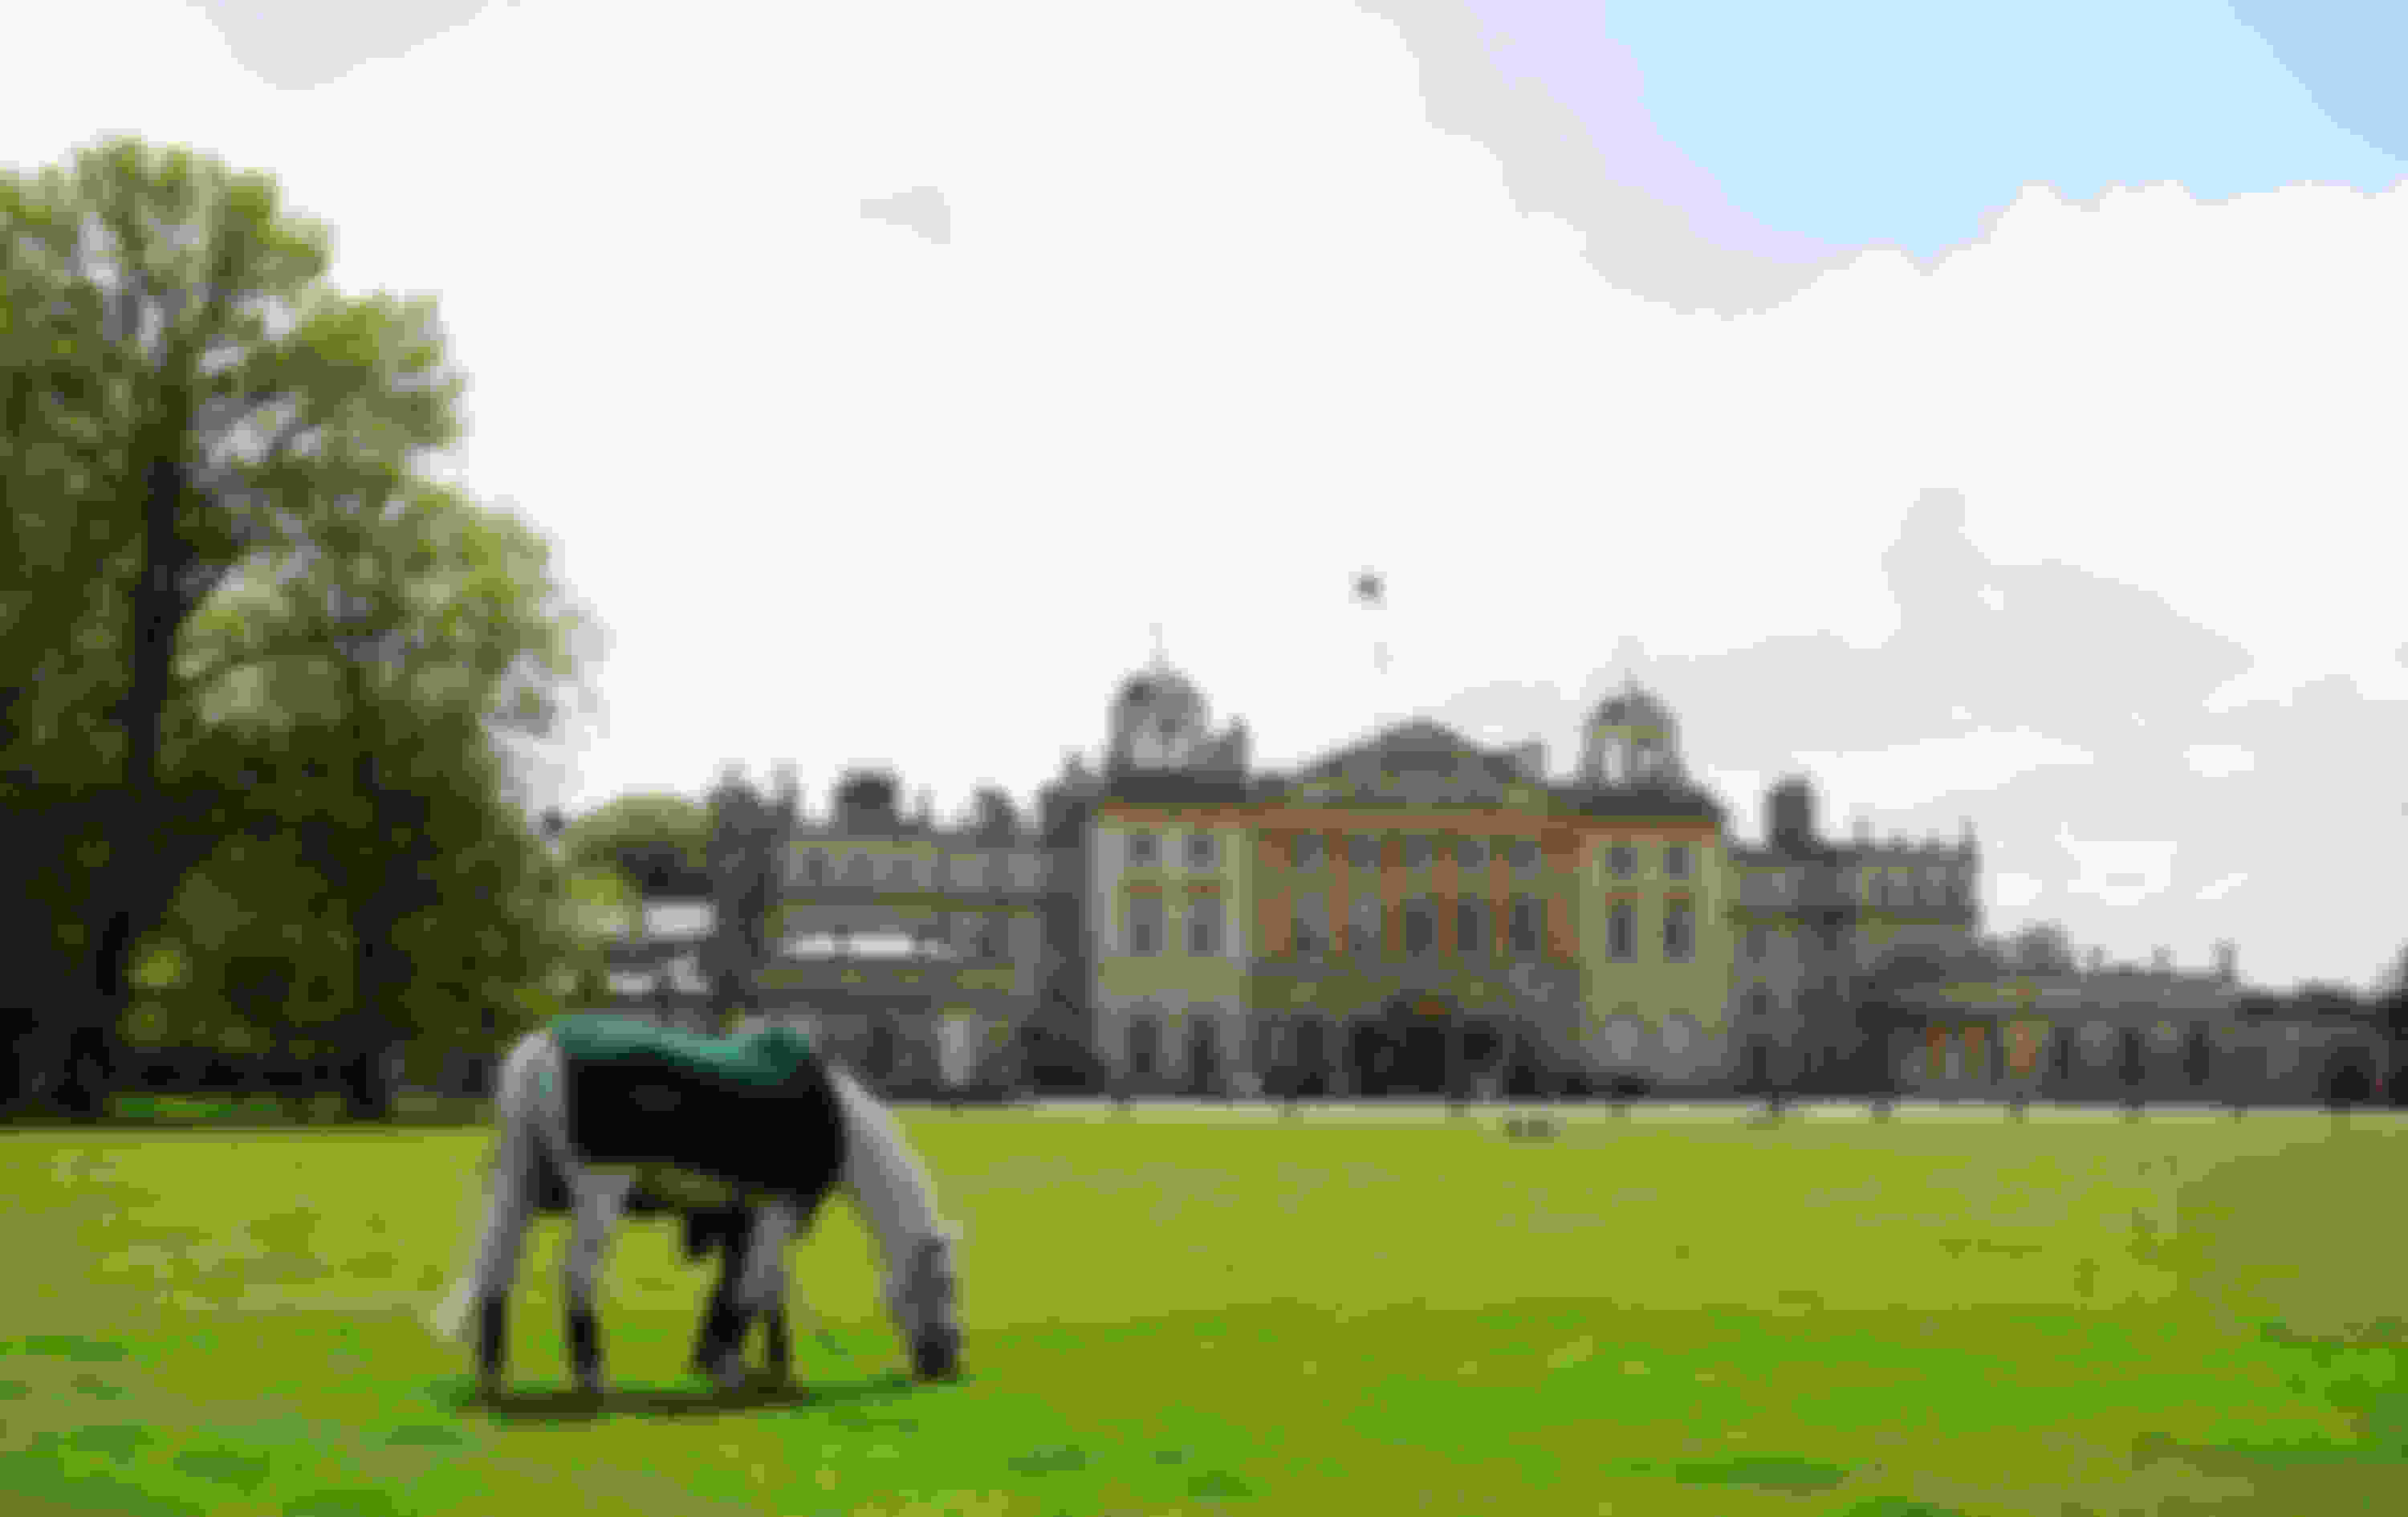 Badminton House in Gloucestershire, England, is where the sport badminton got its name from.